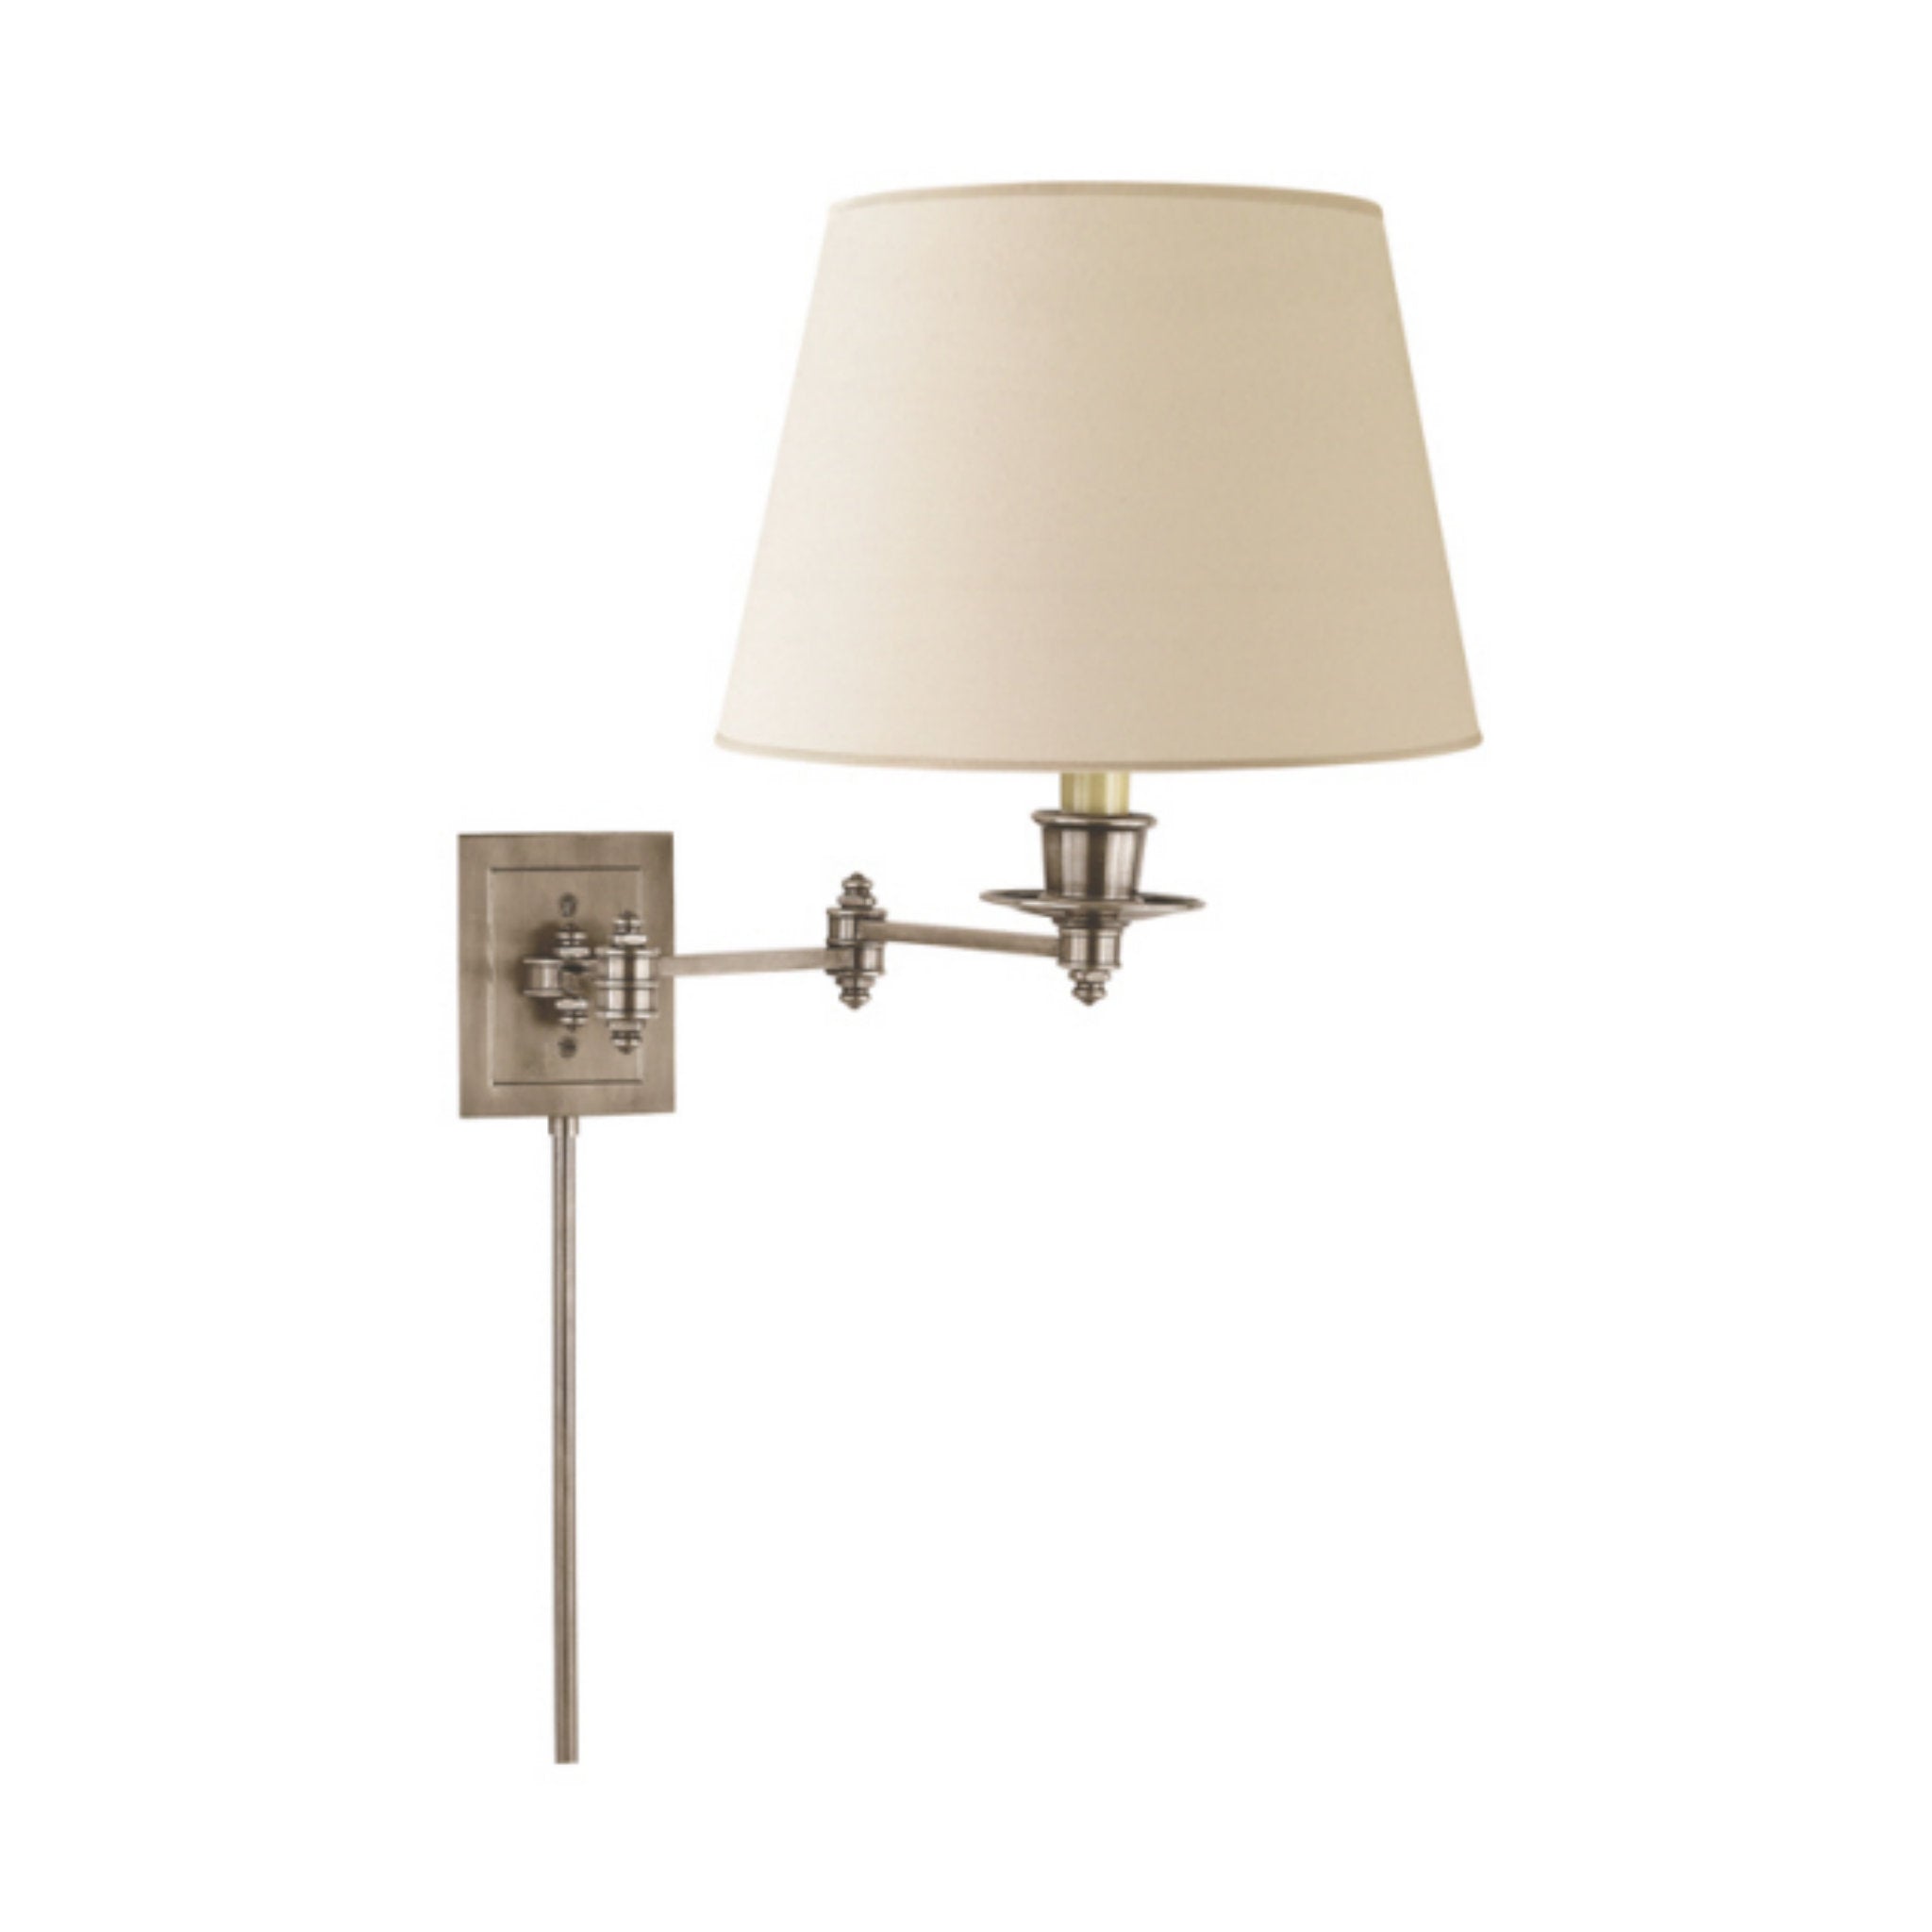 Visual Comfort Triple Swing Arm Wall Lamp in Antique Nickel with Linen Shade